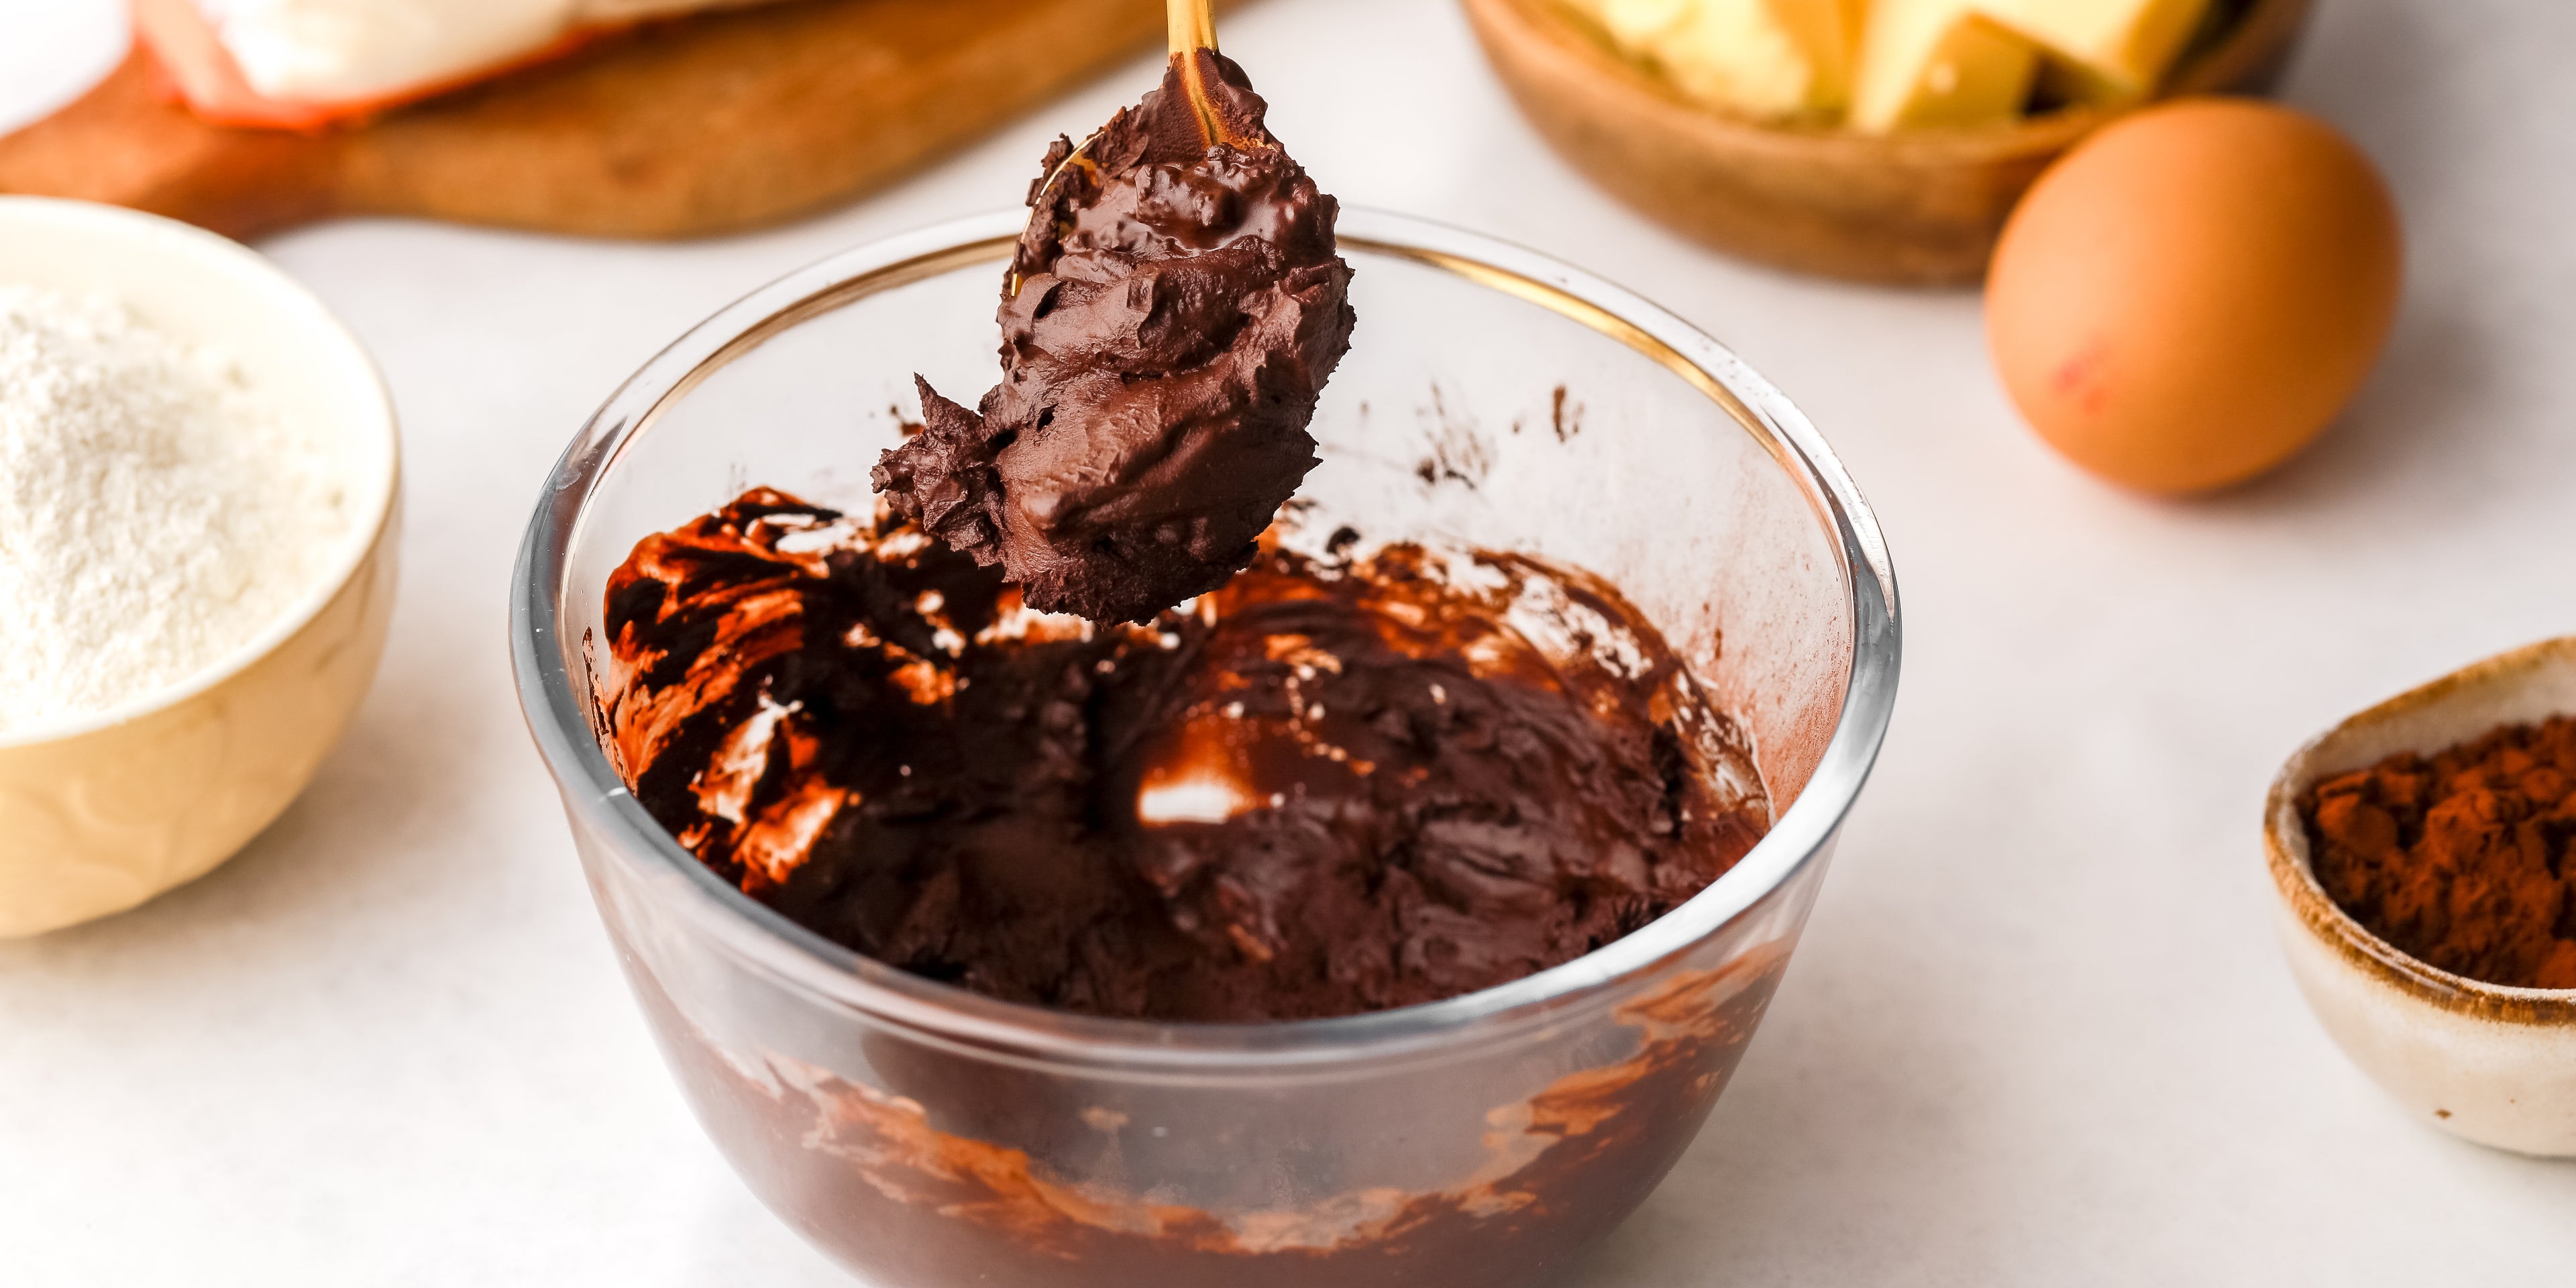 Chocolate buttercream being mixed in a glass bowl